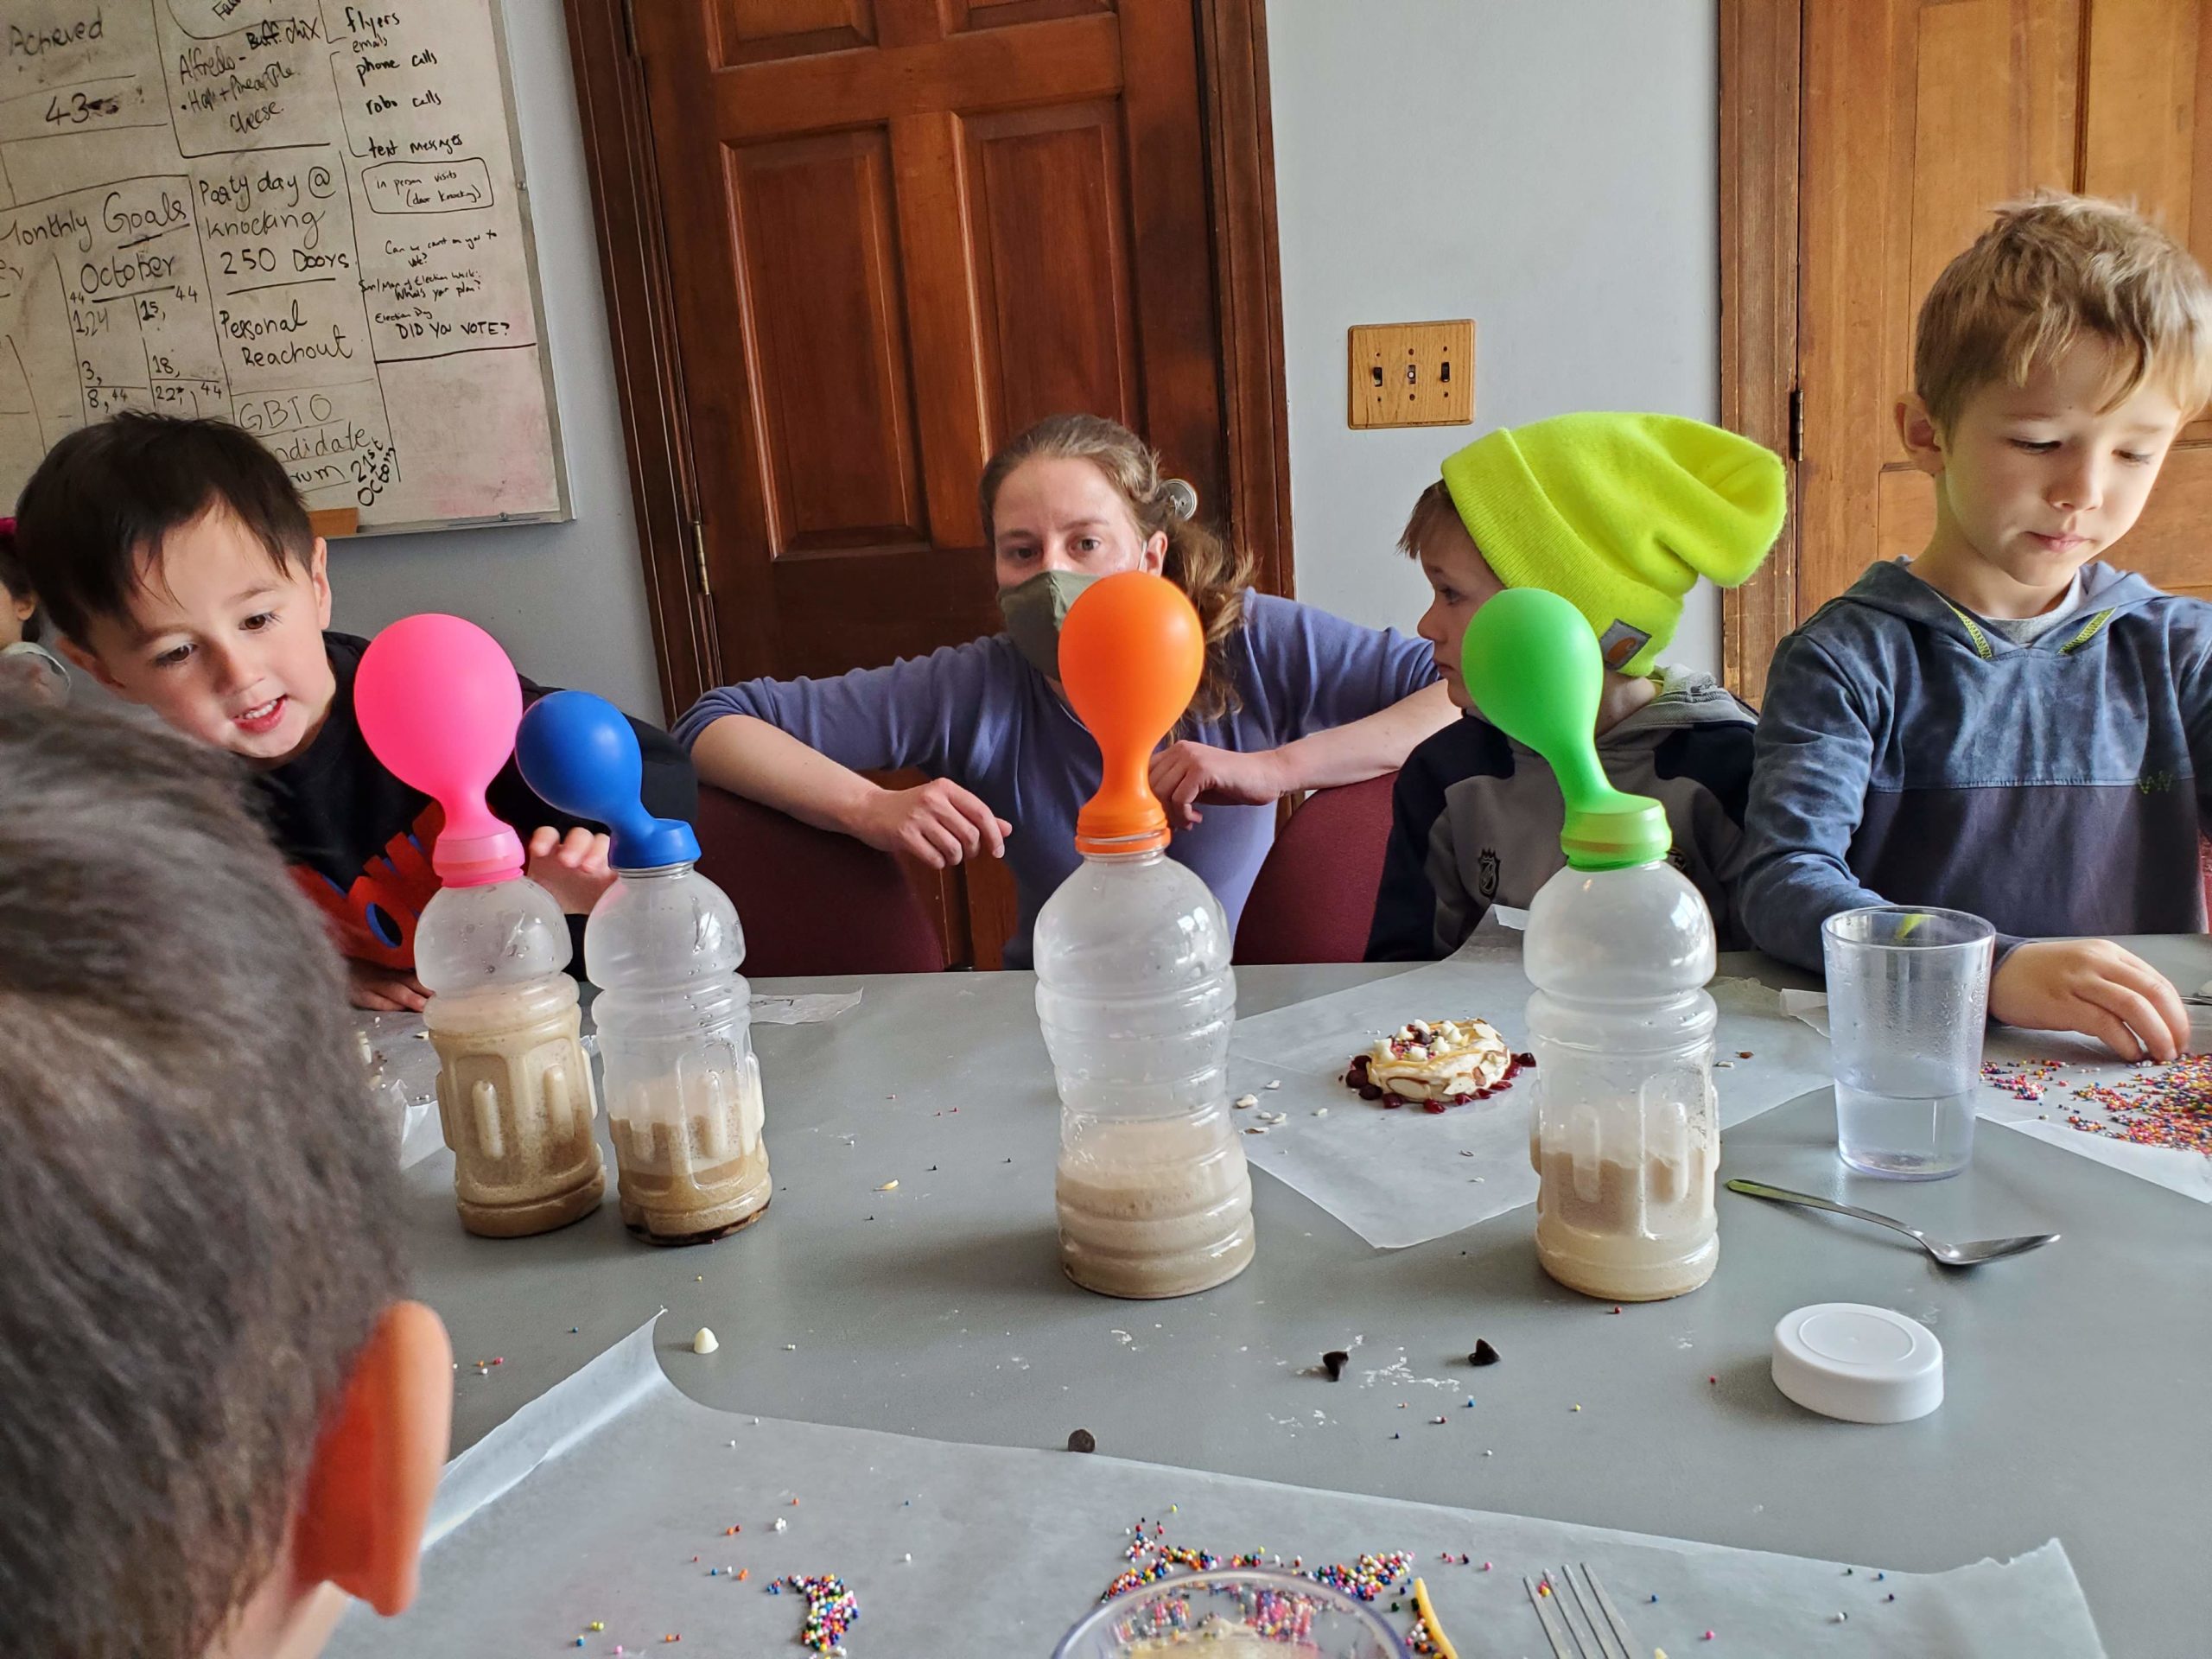 Science teacher Alexa crouches beside three young kids as they observe the gasses released by yeast and sugar in four gatorade bottles with balloons stretched over their openings.